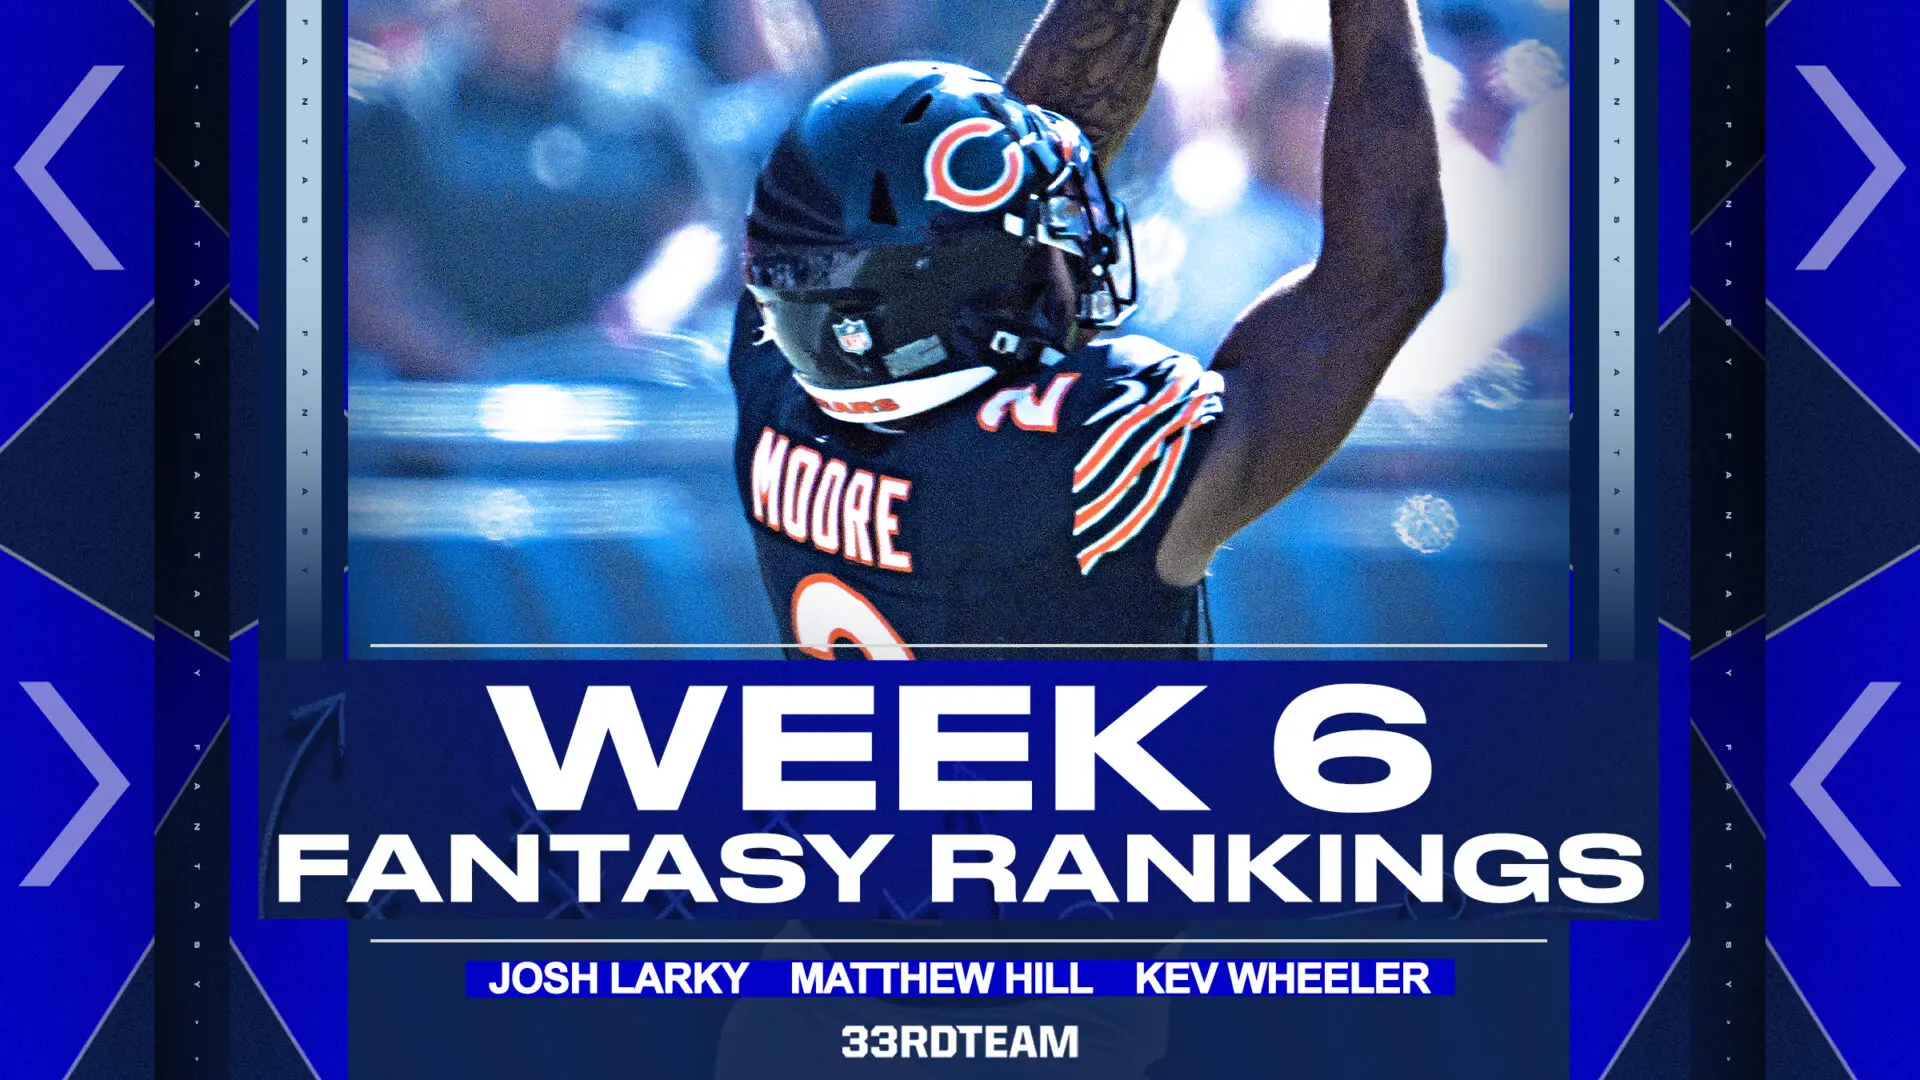 Week 2 WR Rankings & Projections (PPR): Calvin Ridley To Continue Hot Start